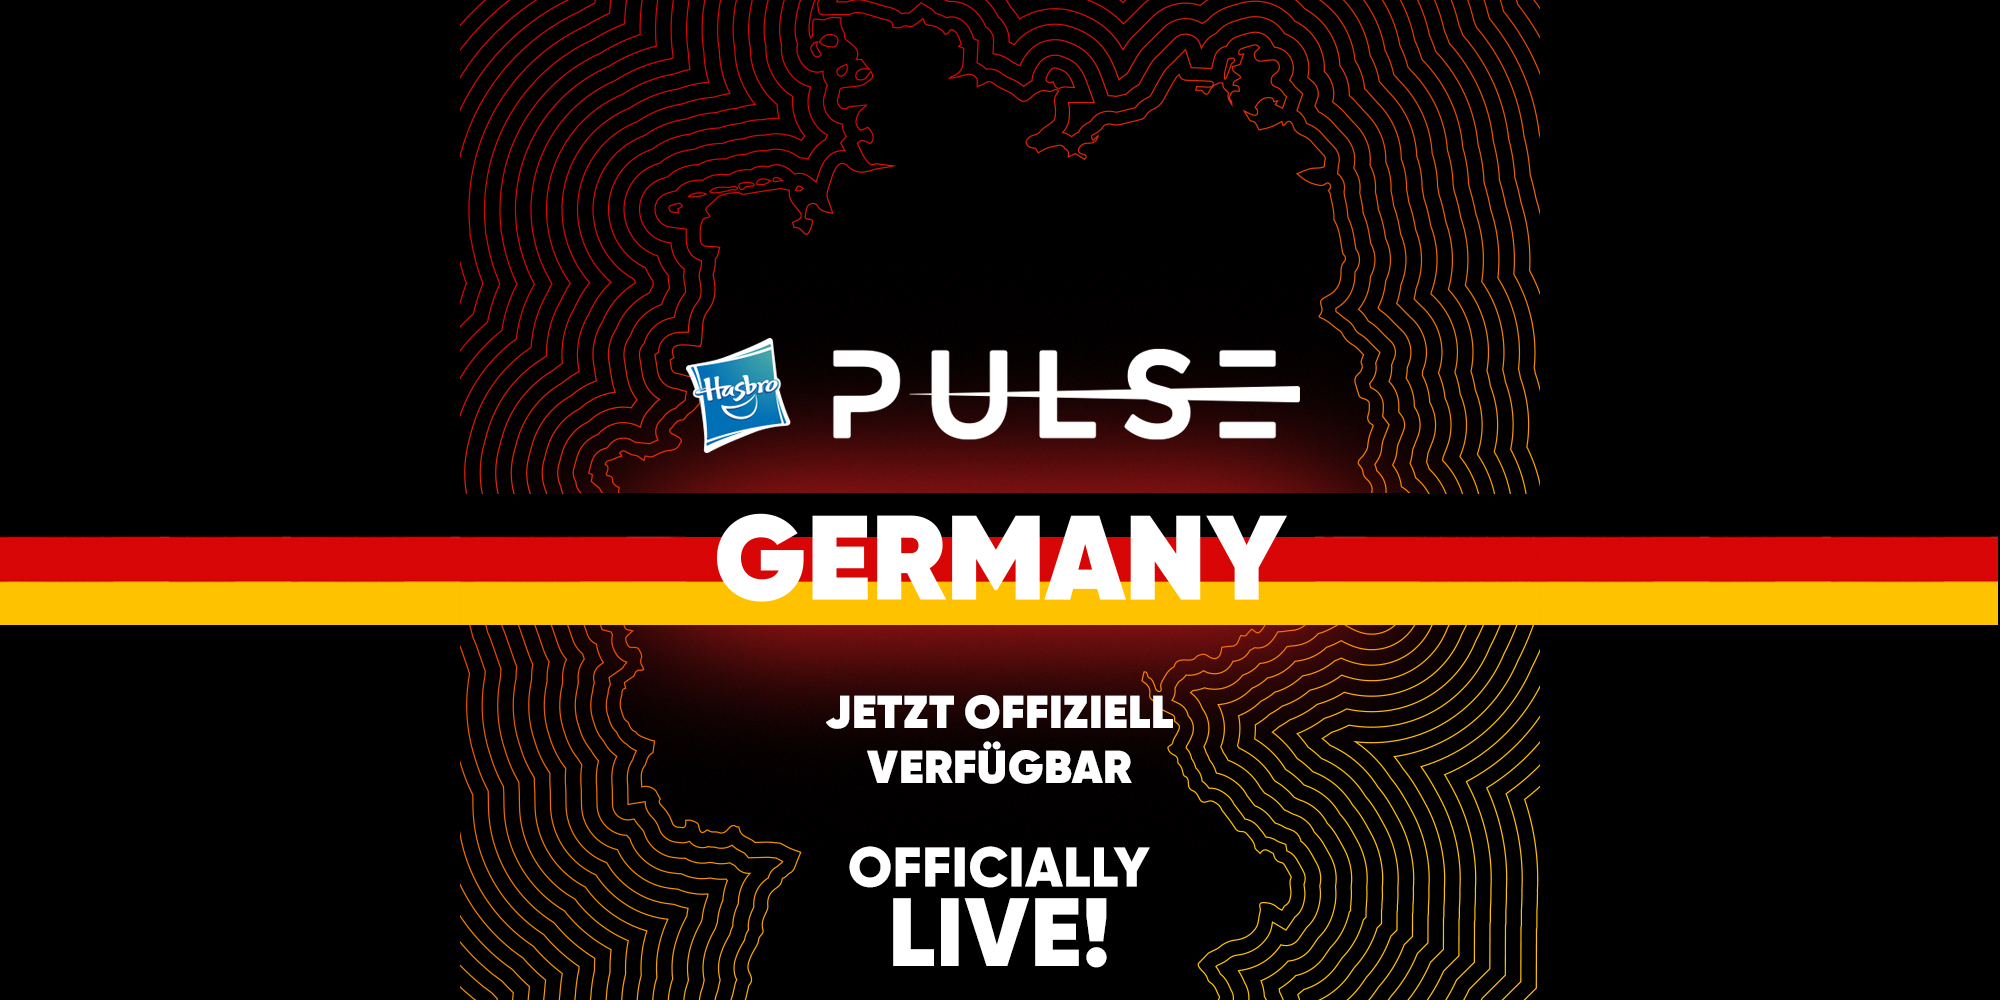 Hasbro Pulse Is Now Available In Germany!